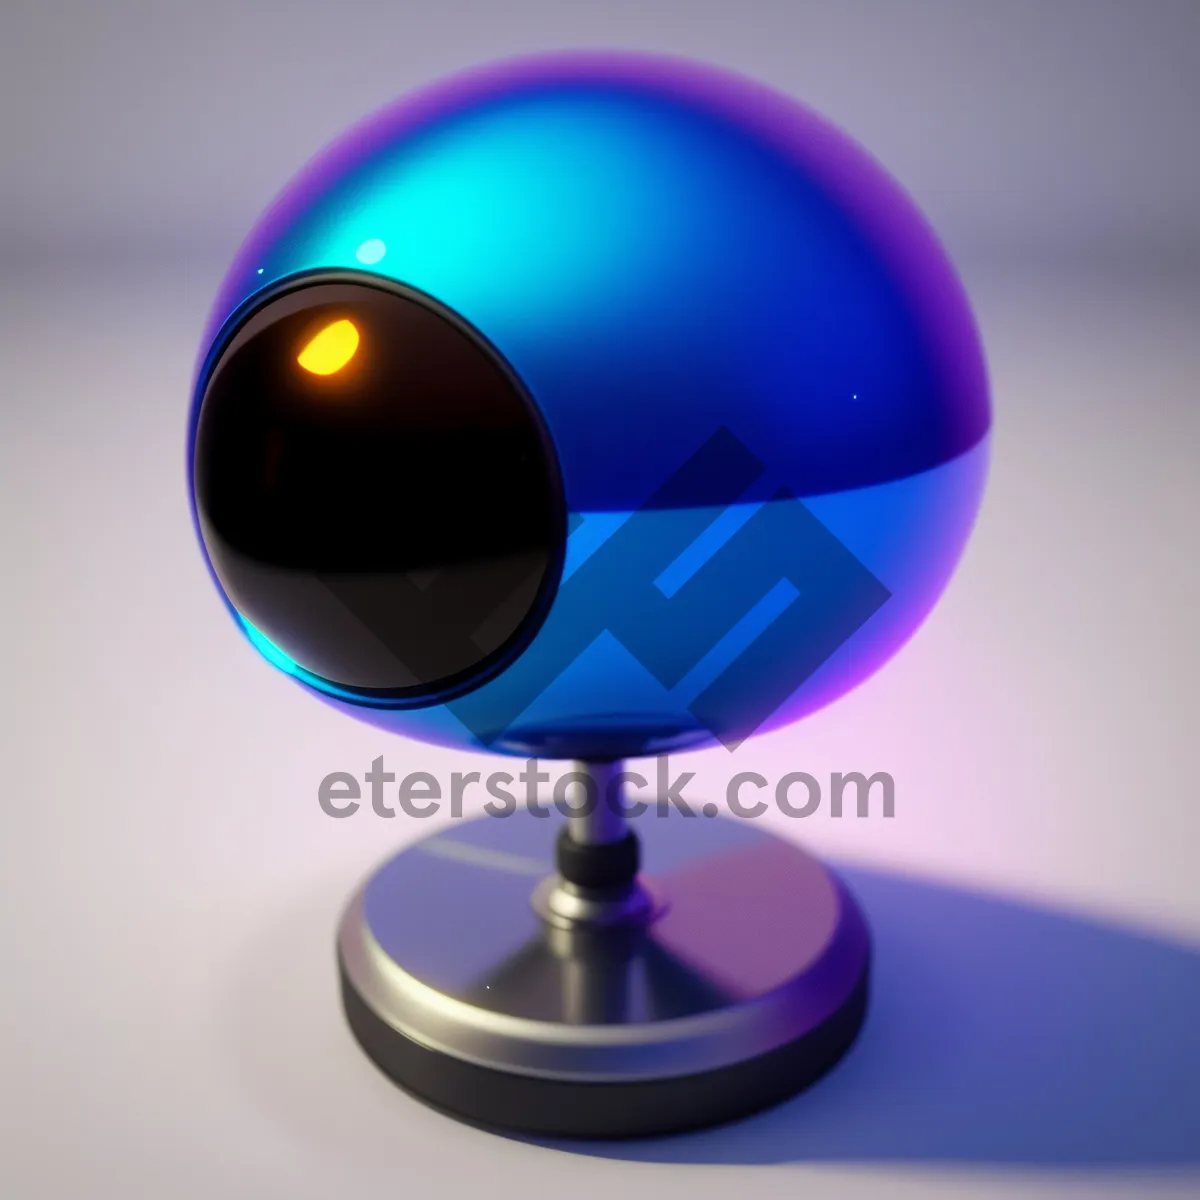 Picture of Global Glass Sphere in 3D Perspective